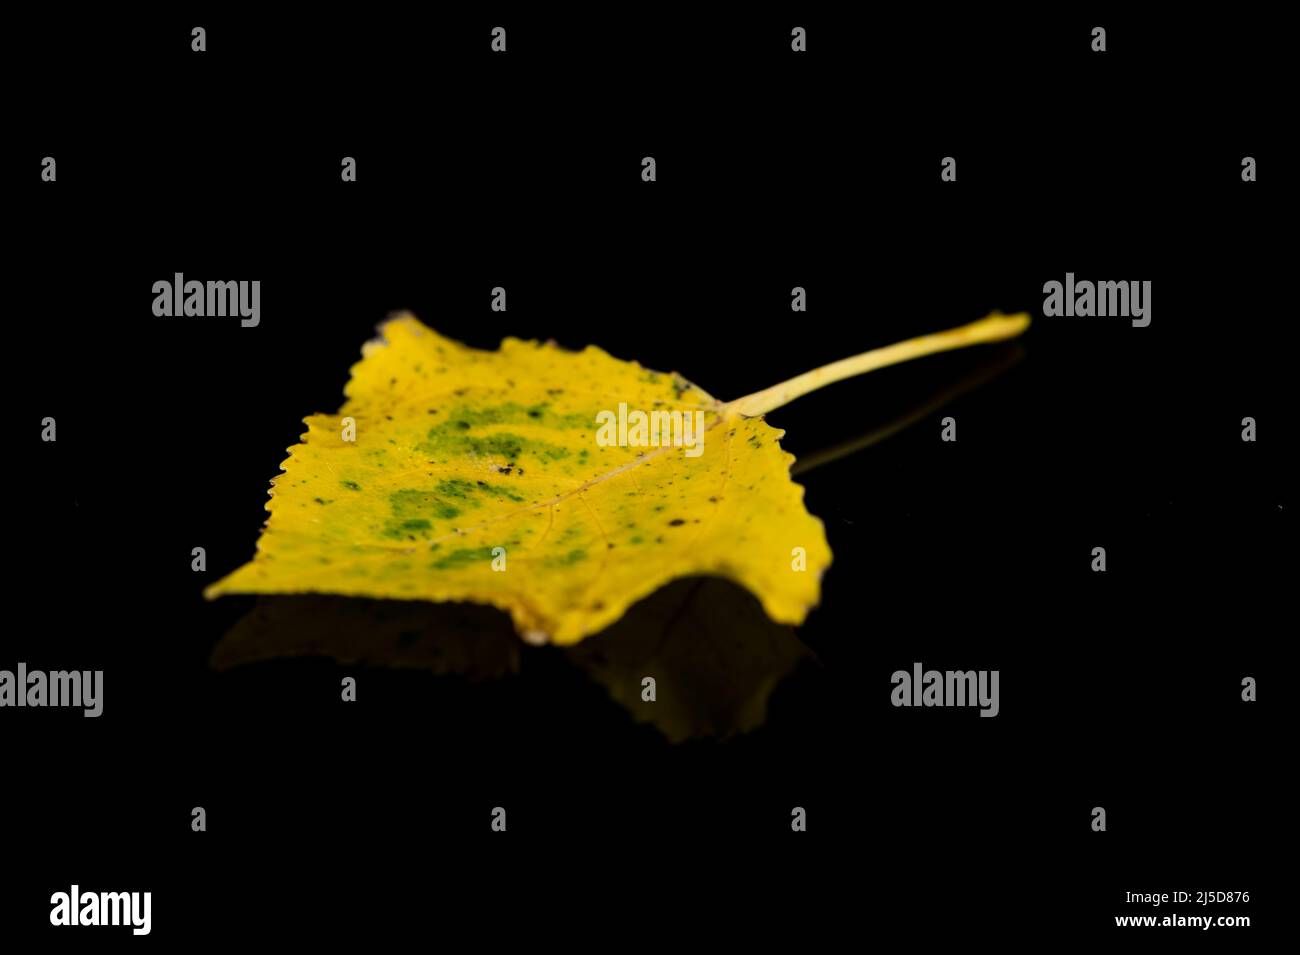 A beautiful picture of a leaf on a black background Stock Photo